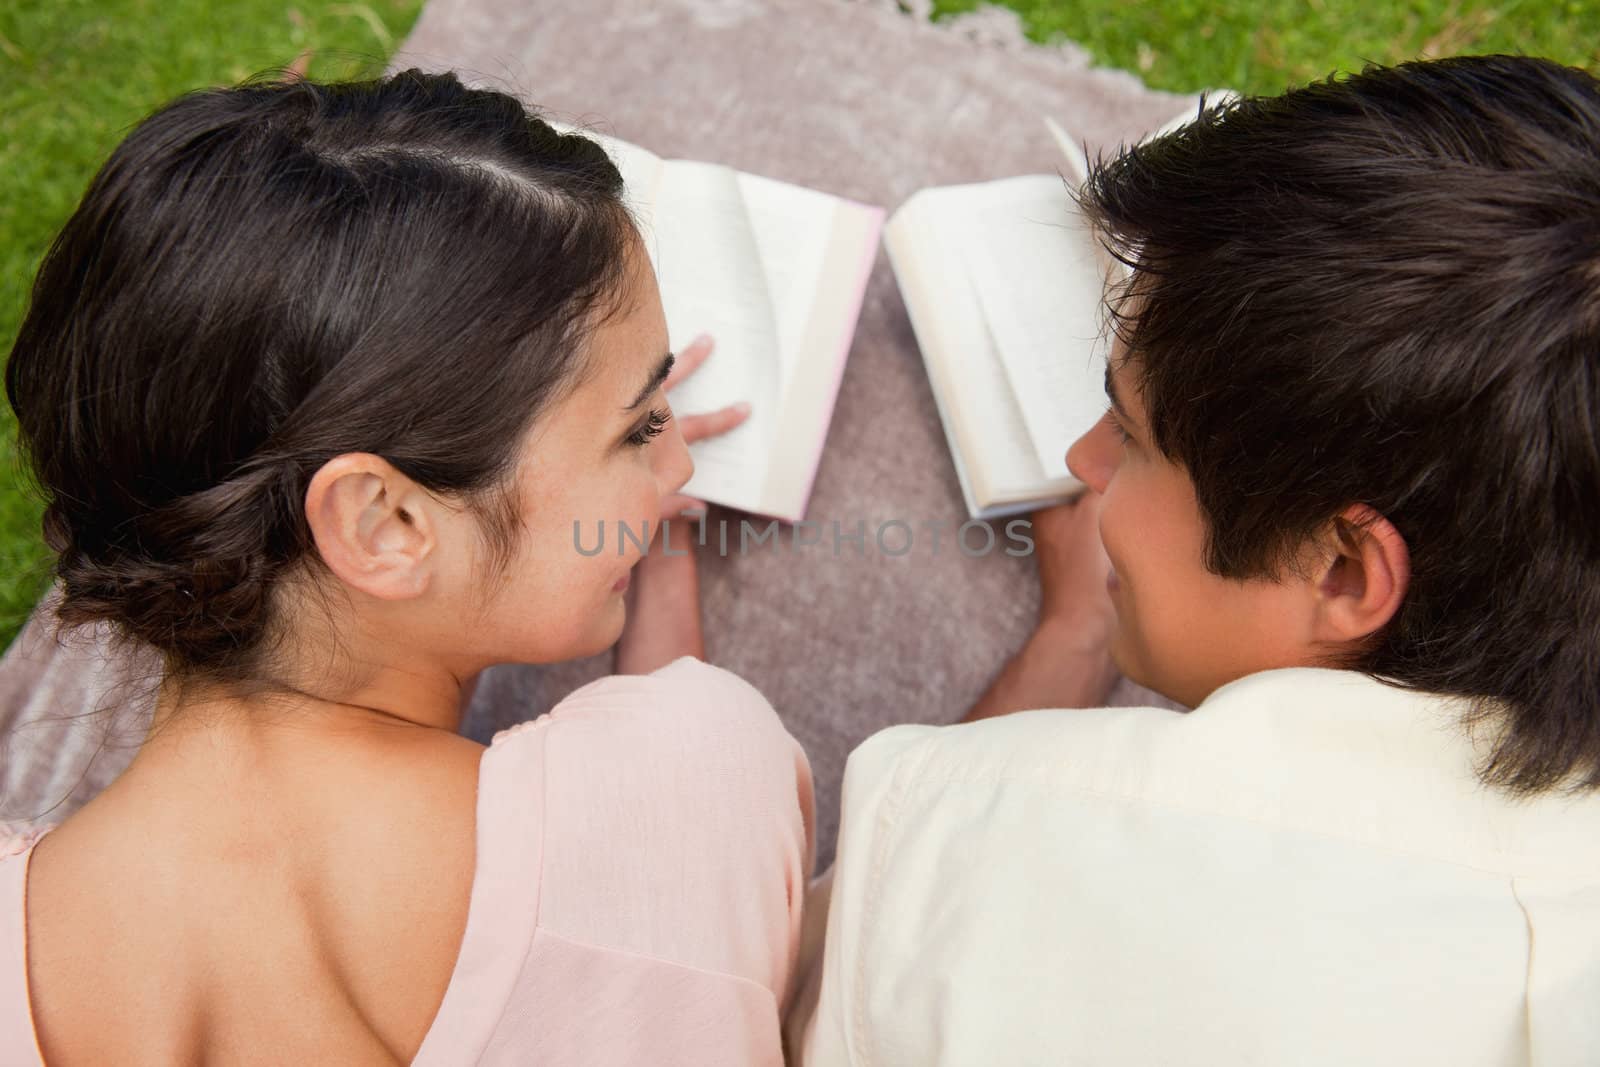 Rear view of a man and a woman looking at each other while reading books as they lie prone on a blanket in the grass